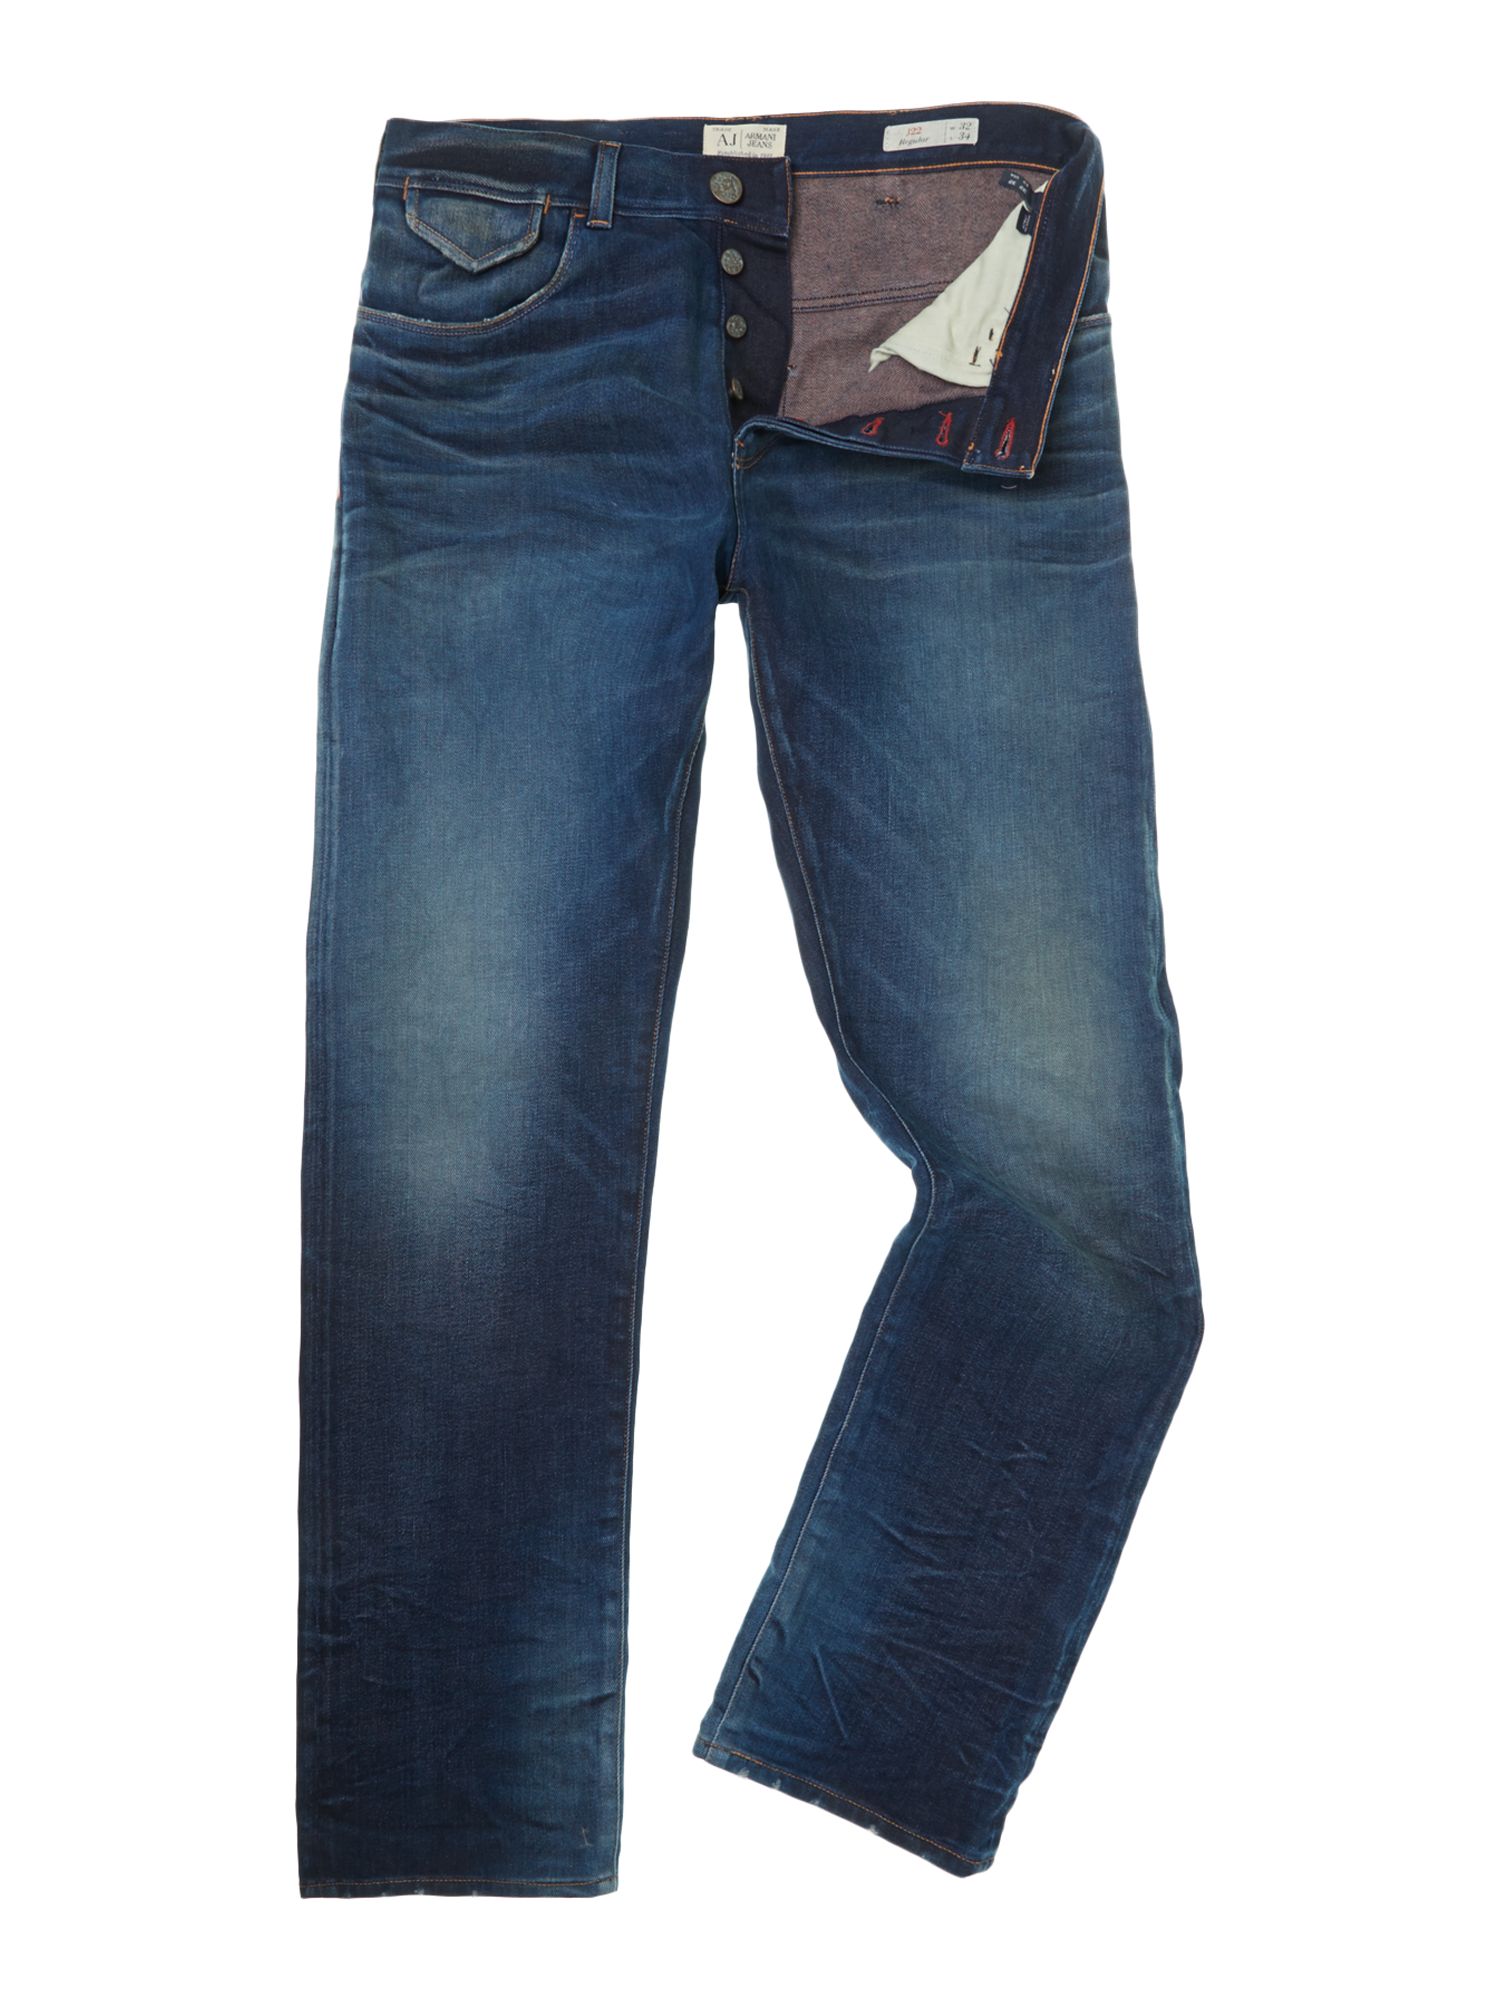 Armani Jeans Made in Italy Light Wash Jeans in Blue for Men (Denim) | Lyst